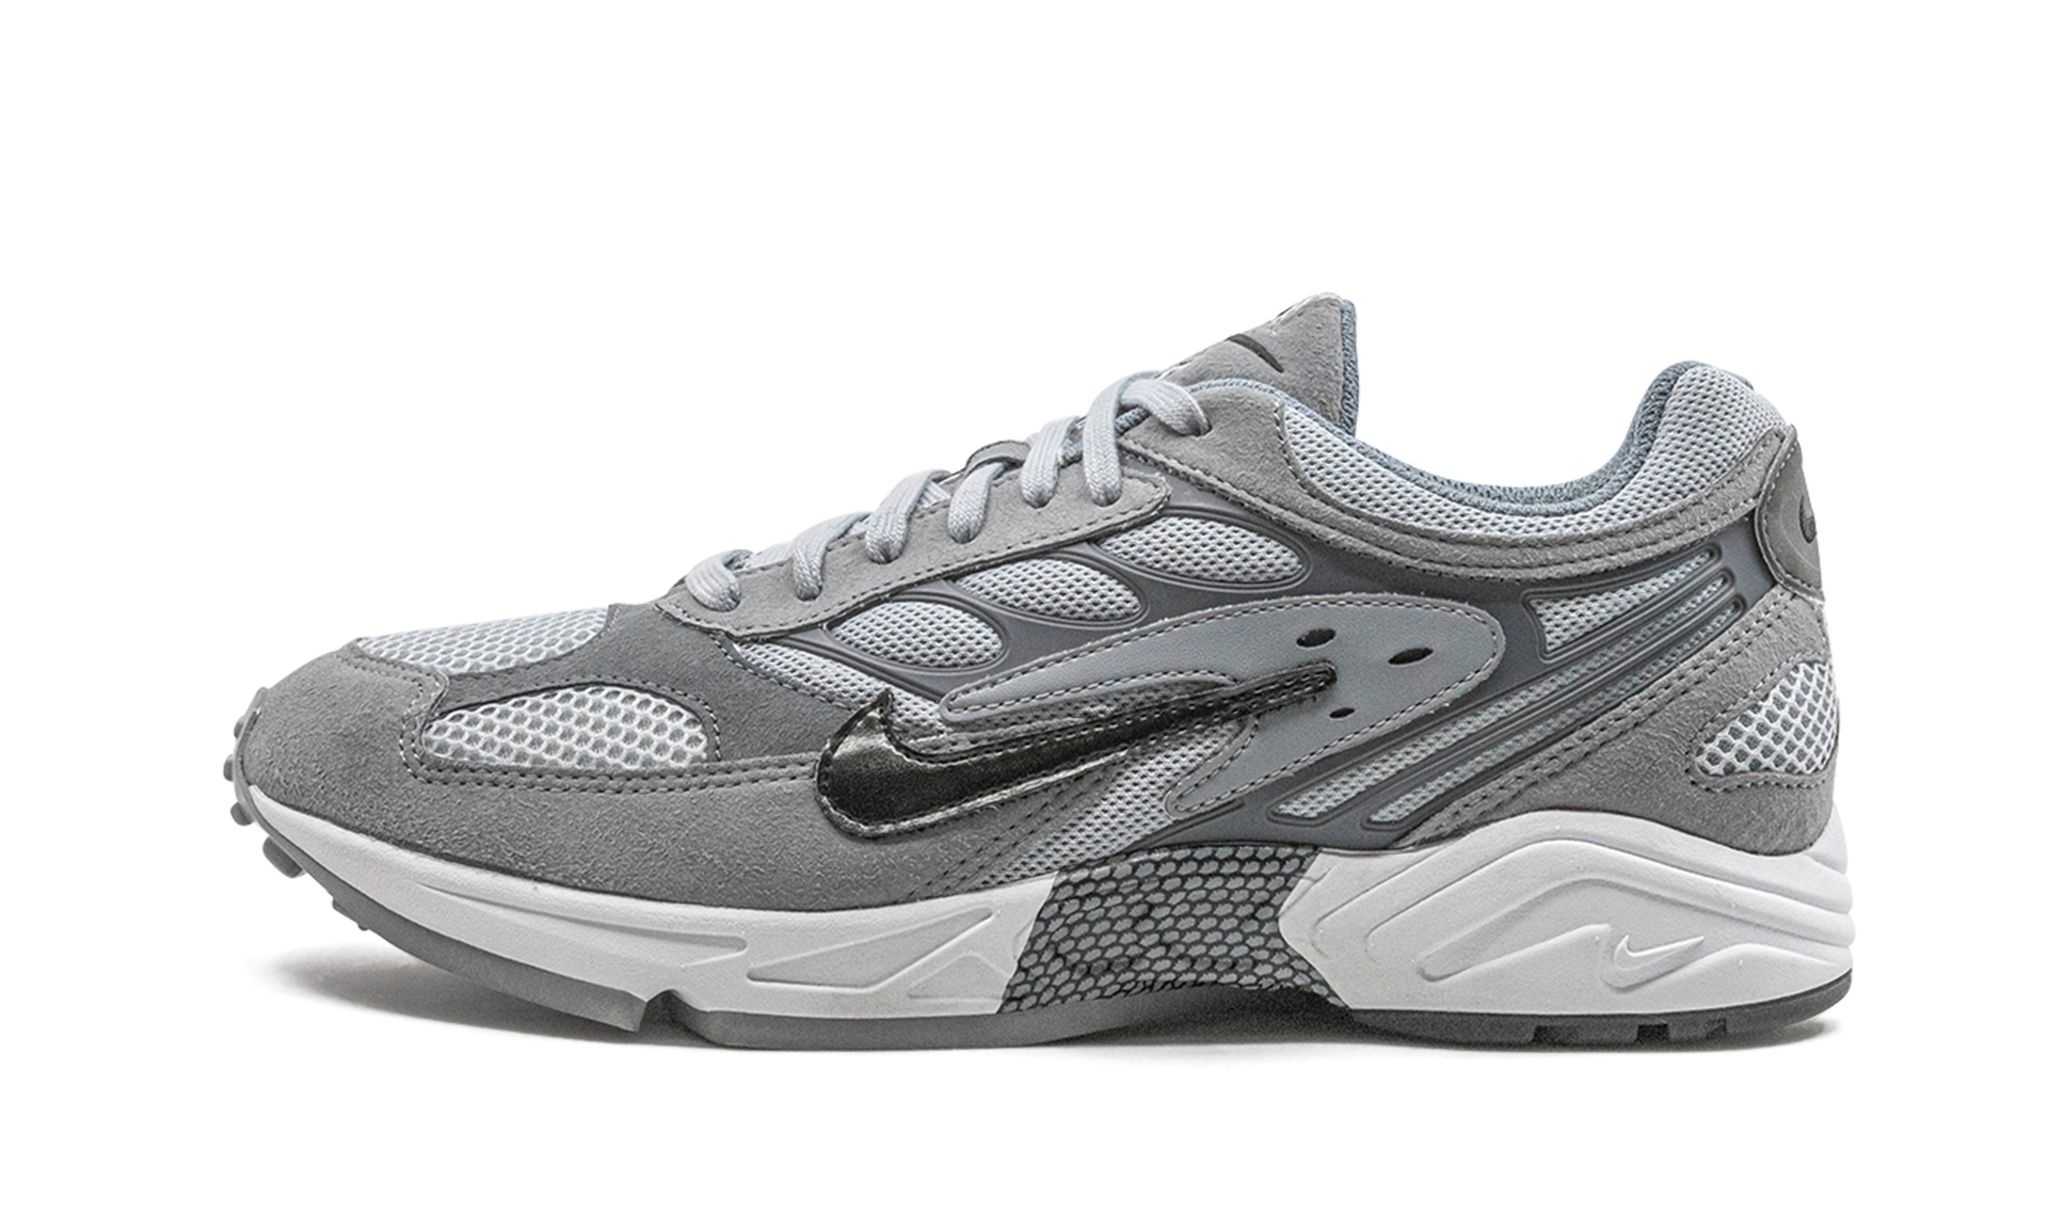 Ghost Racer "Cool Grey" - 1